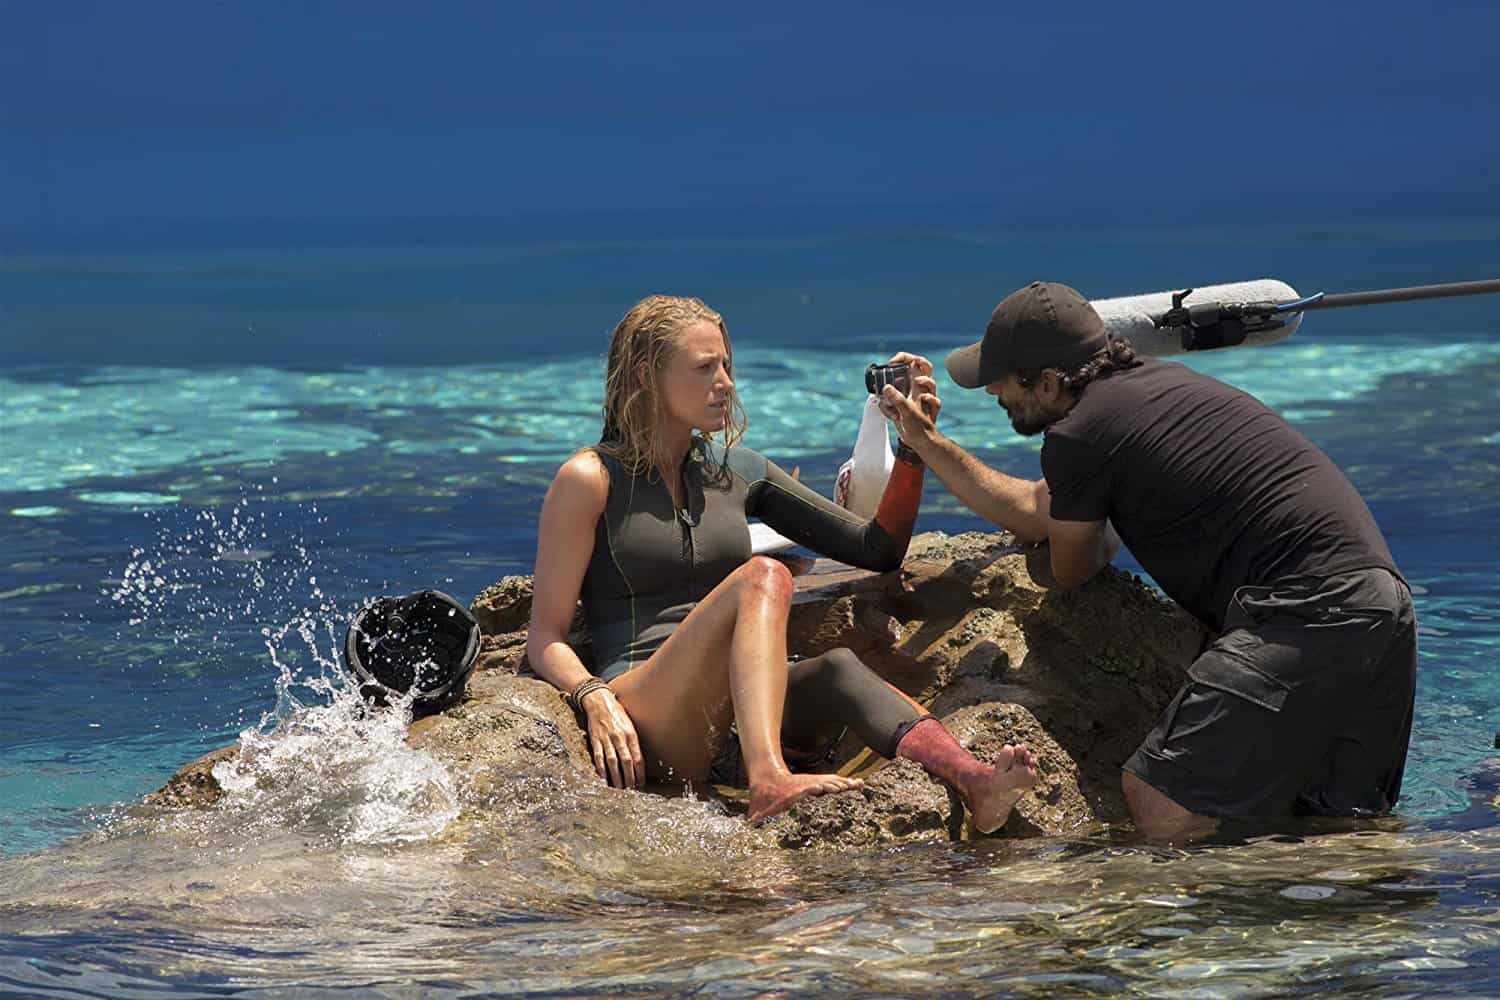 Jaume Collet Serra And Blake Lively The Shallows